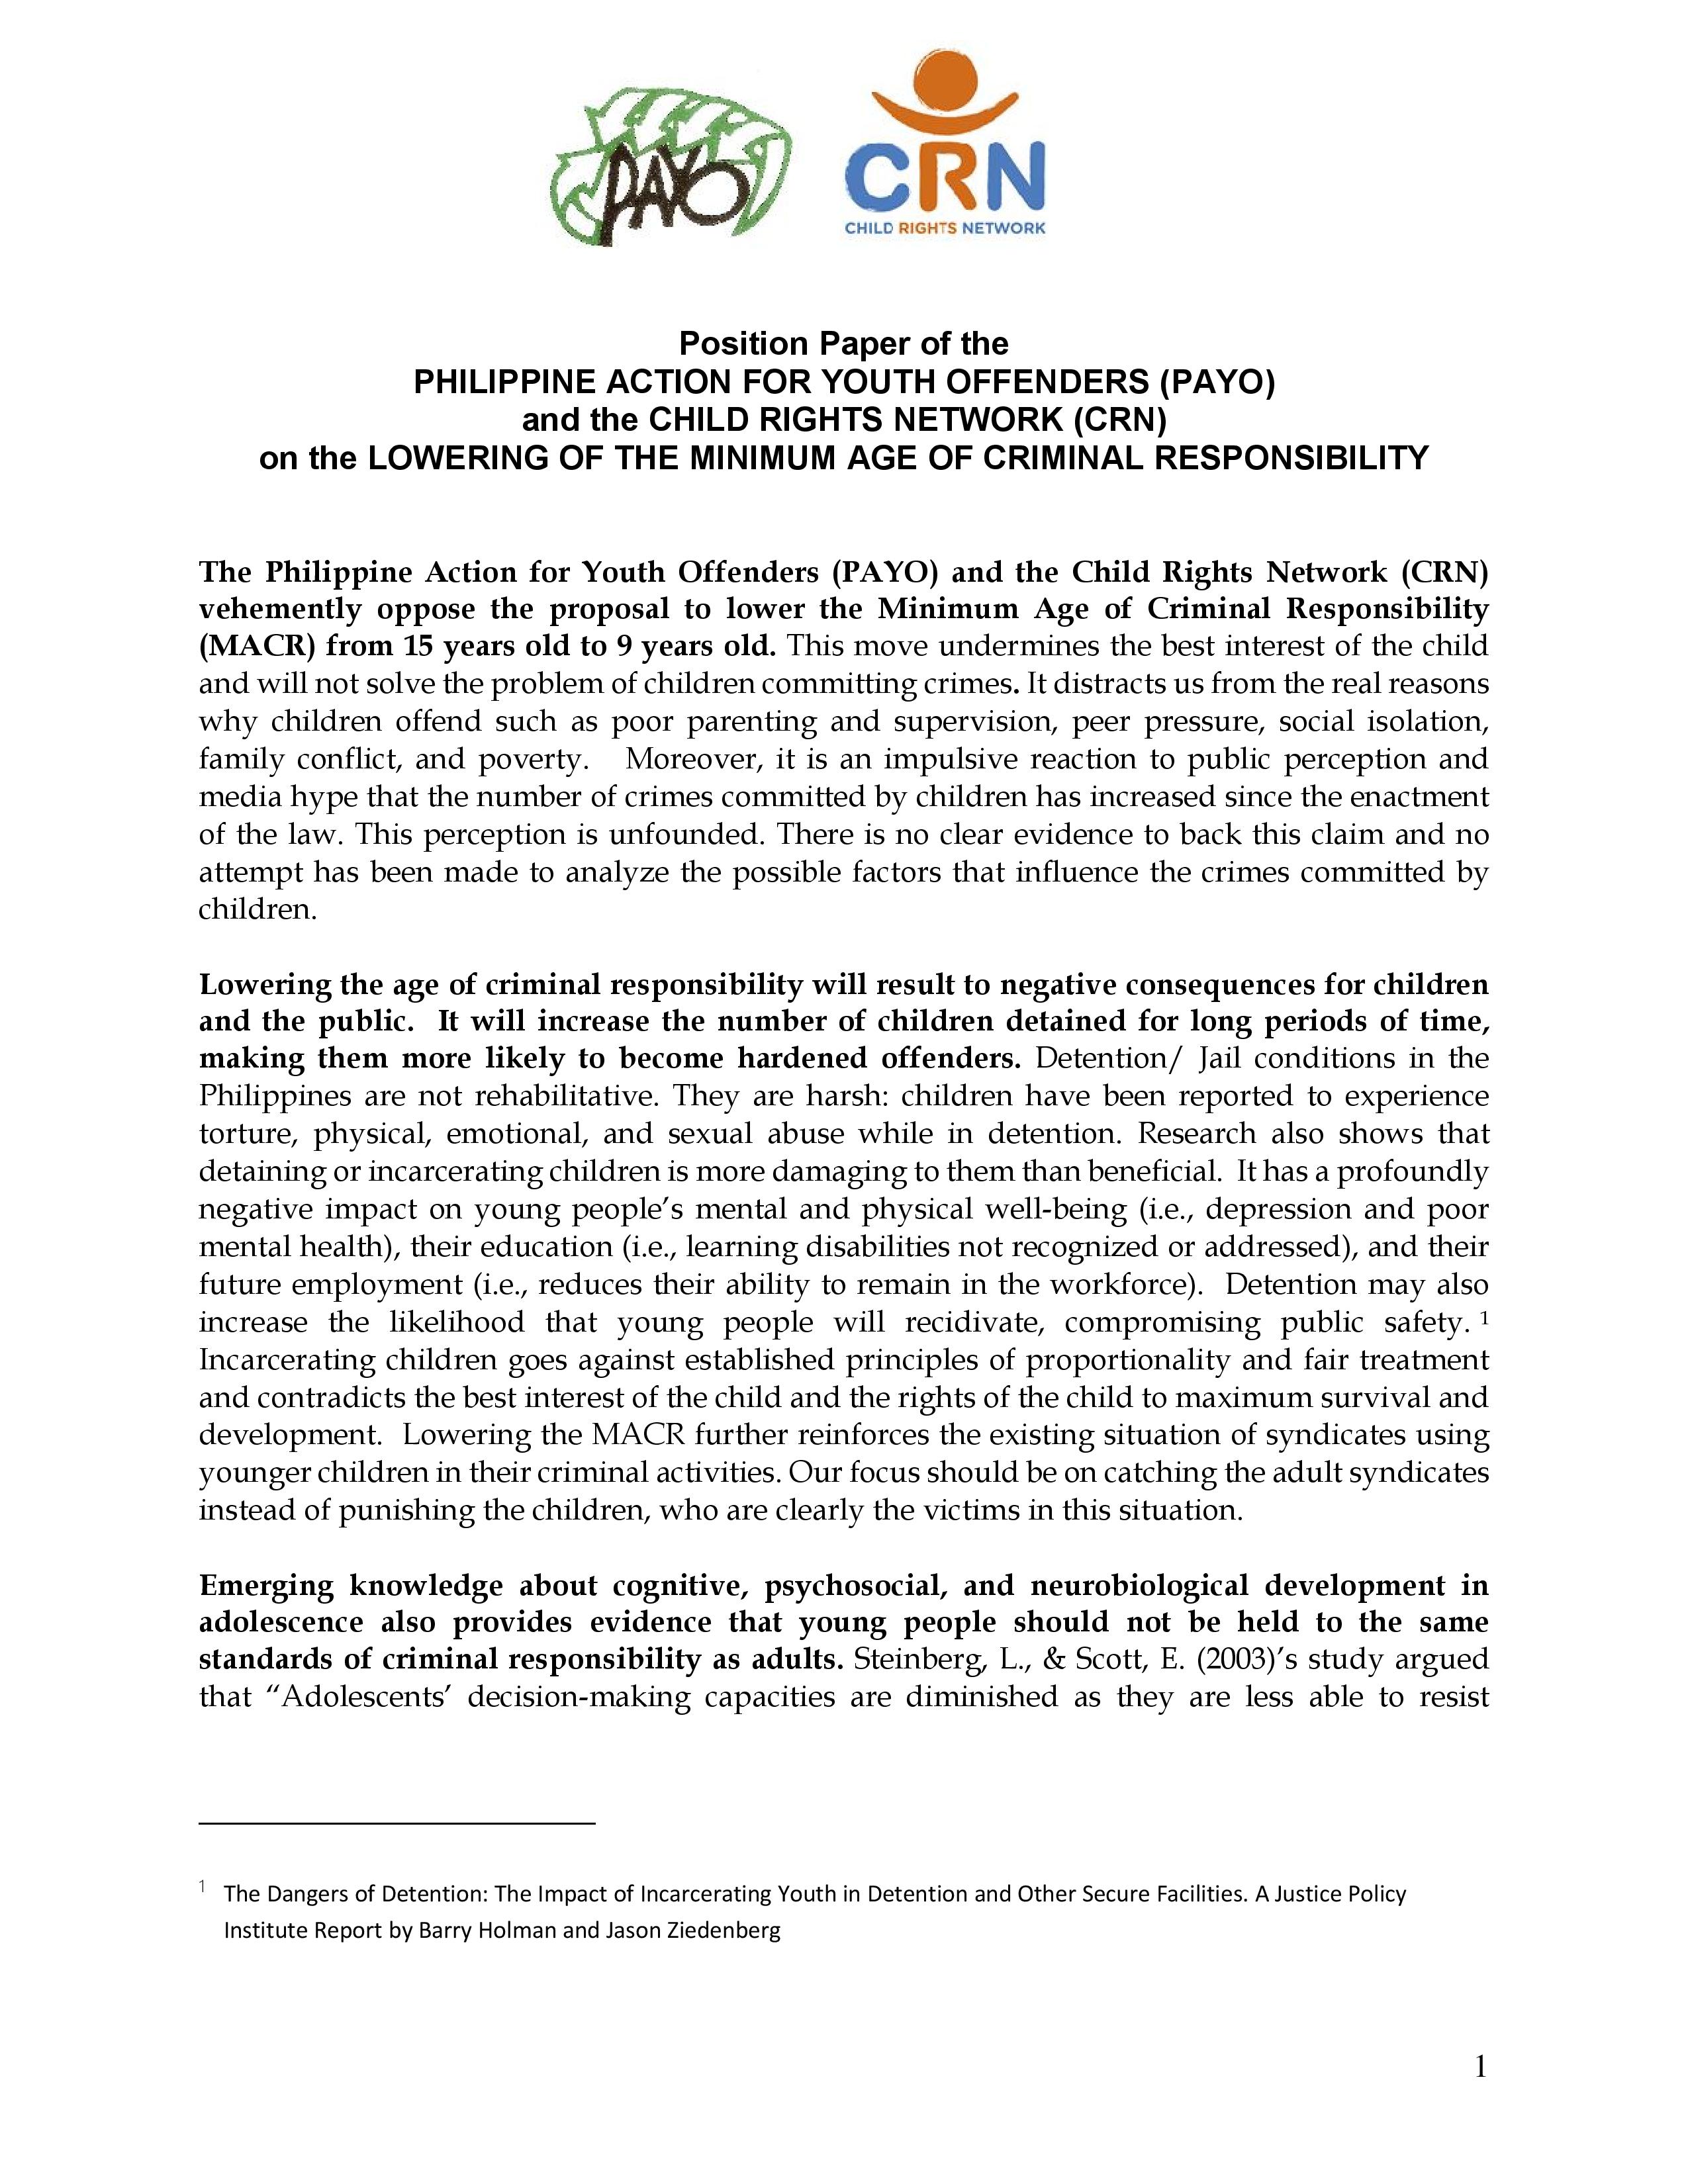 Position Paper Of The Philippine Action For Youth Offenders Payo And The Child Rights Network Crn On Lowering Of The Minimum Age Of Criminal Responsibility Child Rights Coalition Asia